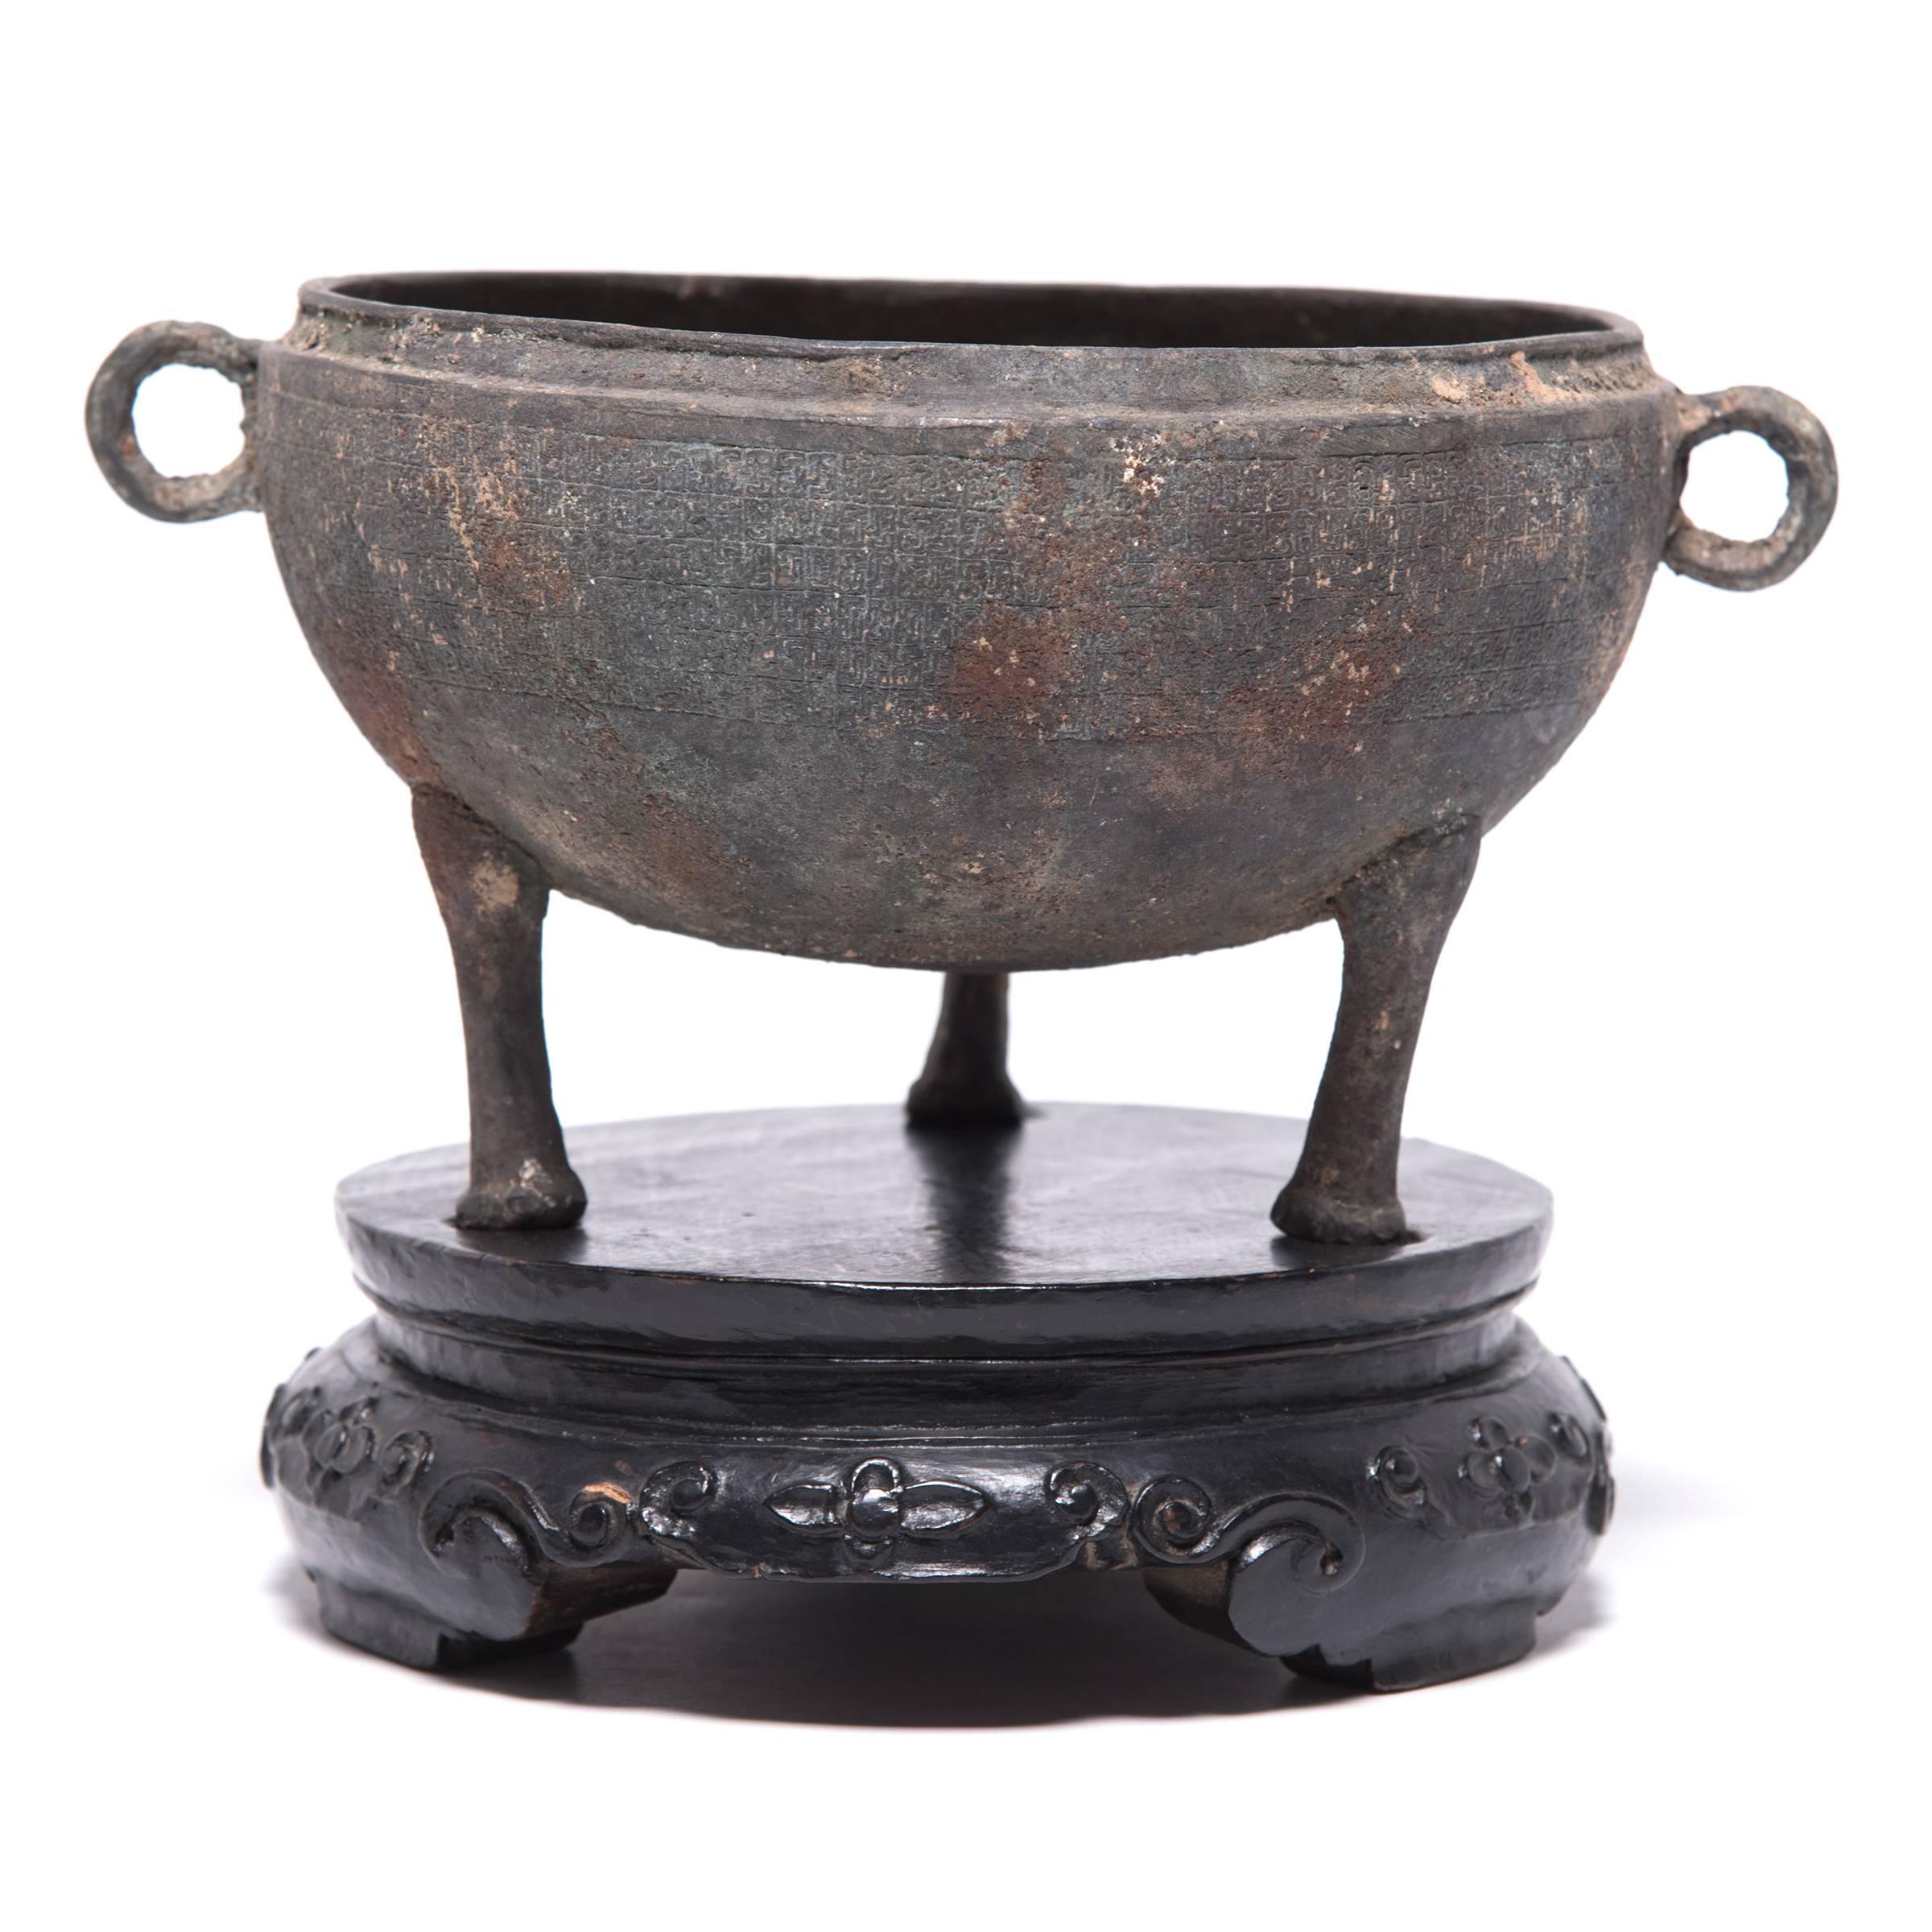 Qing Chinese Bronze Vessel with Tripod Feet, c. 1750 For Sale